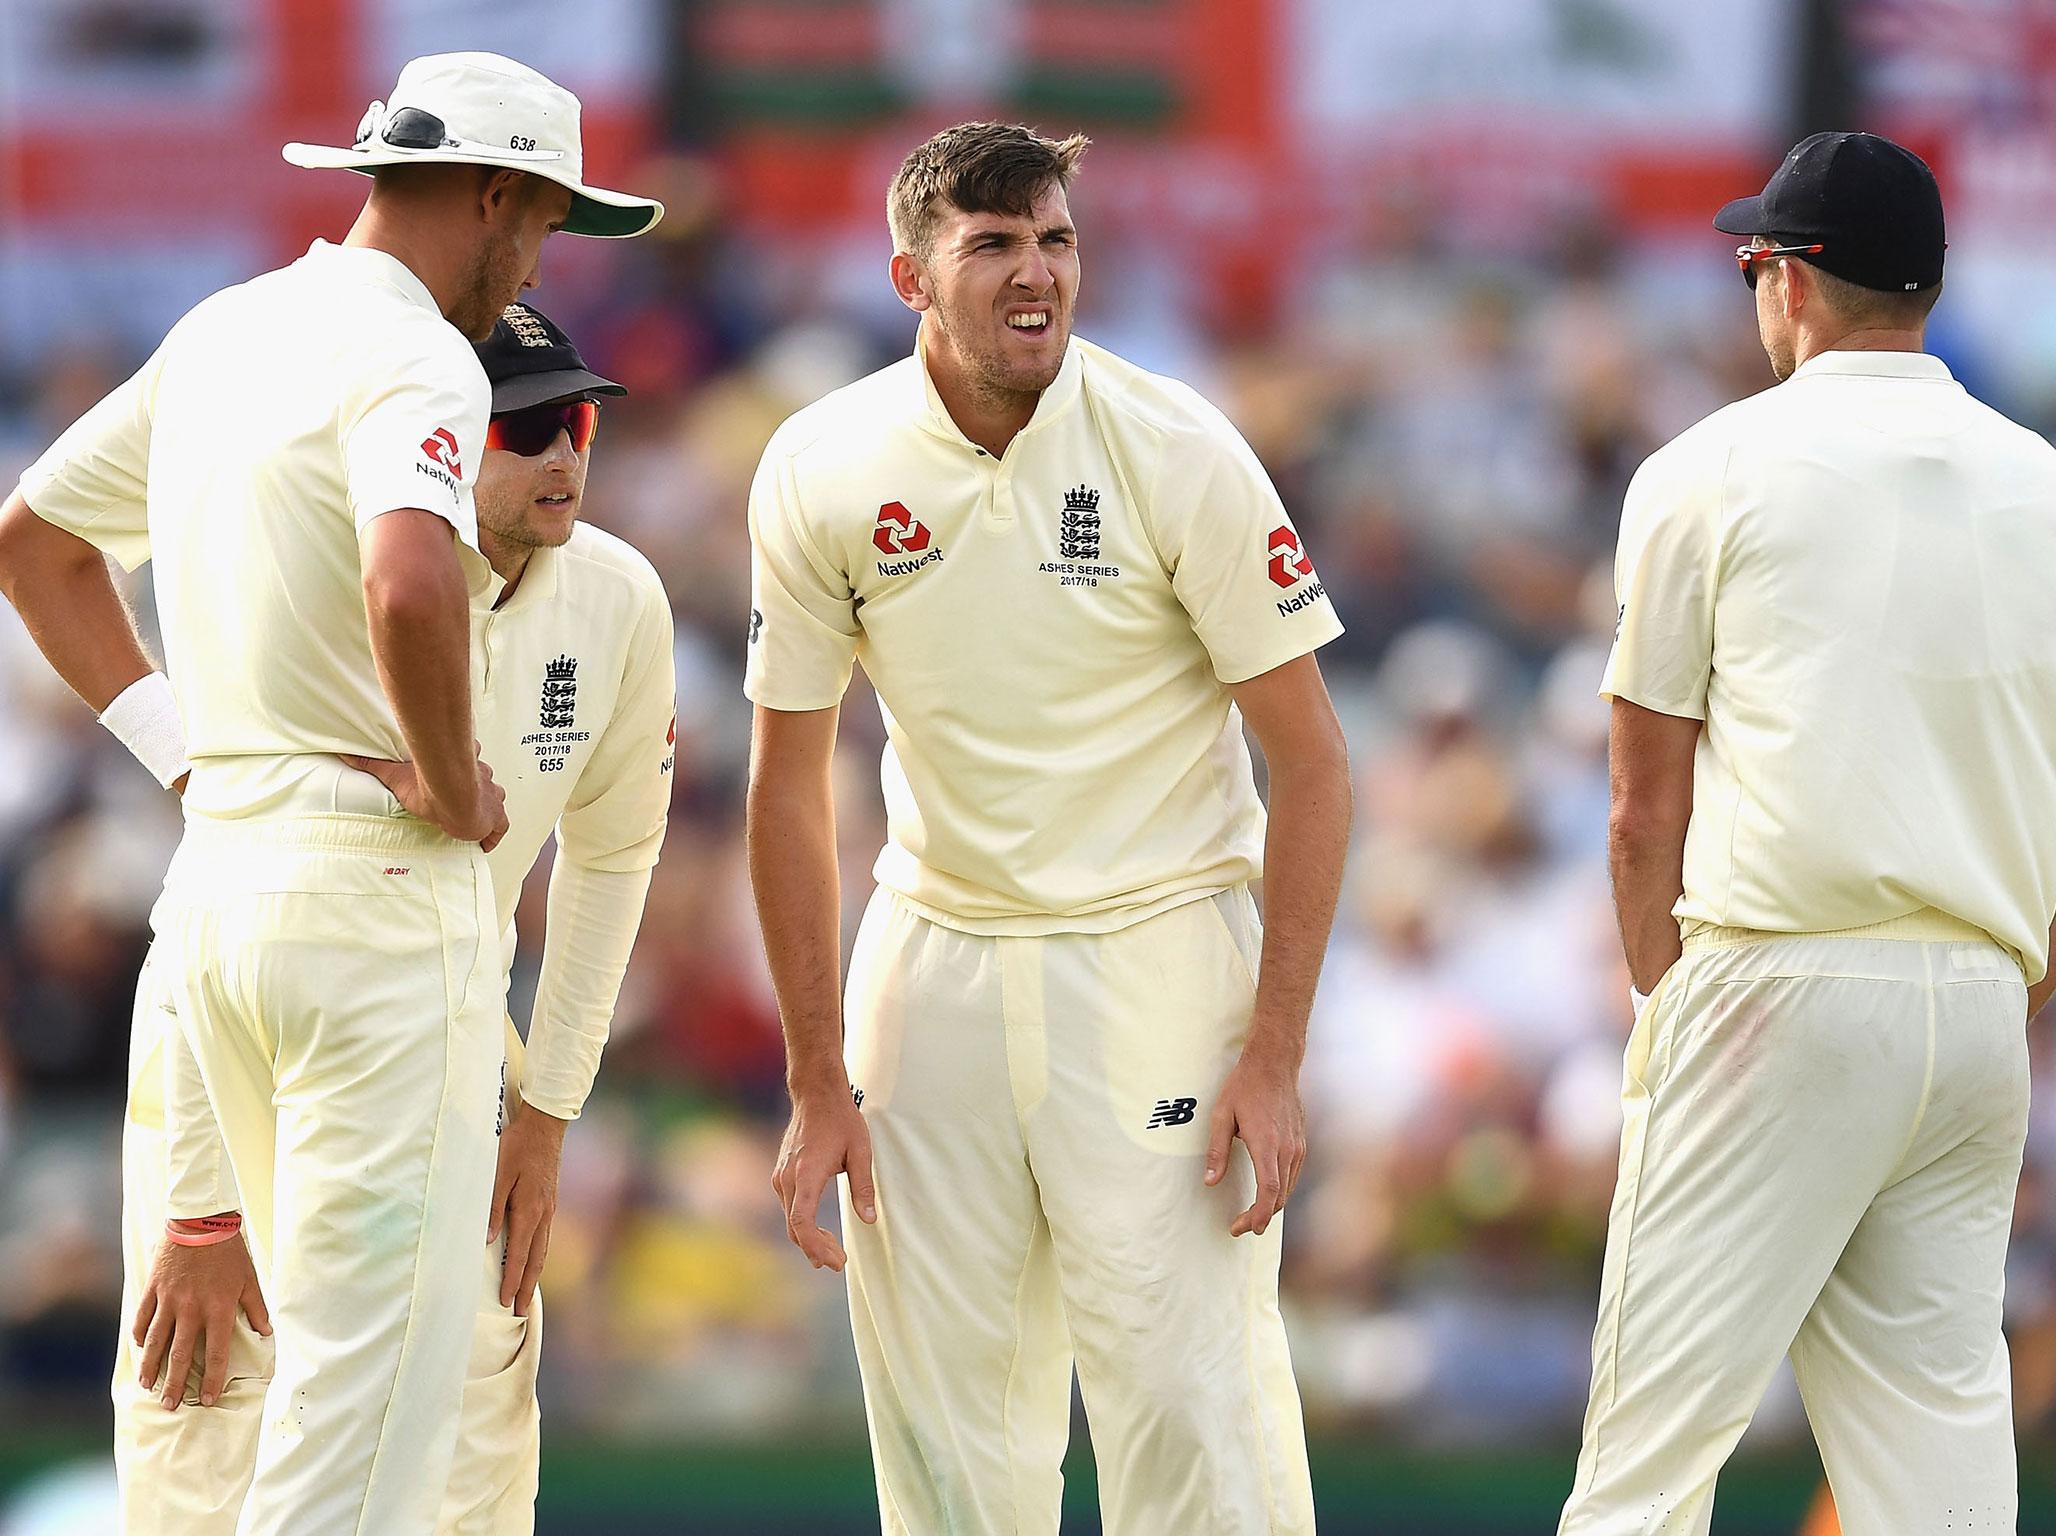 Craig Overton will be assessed by England's medical team on Saturday